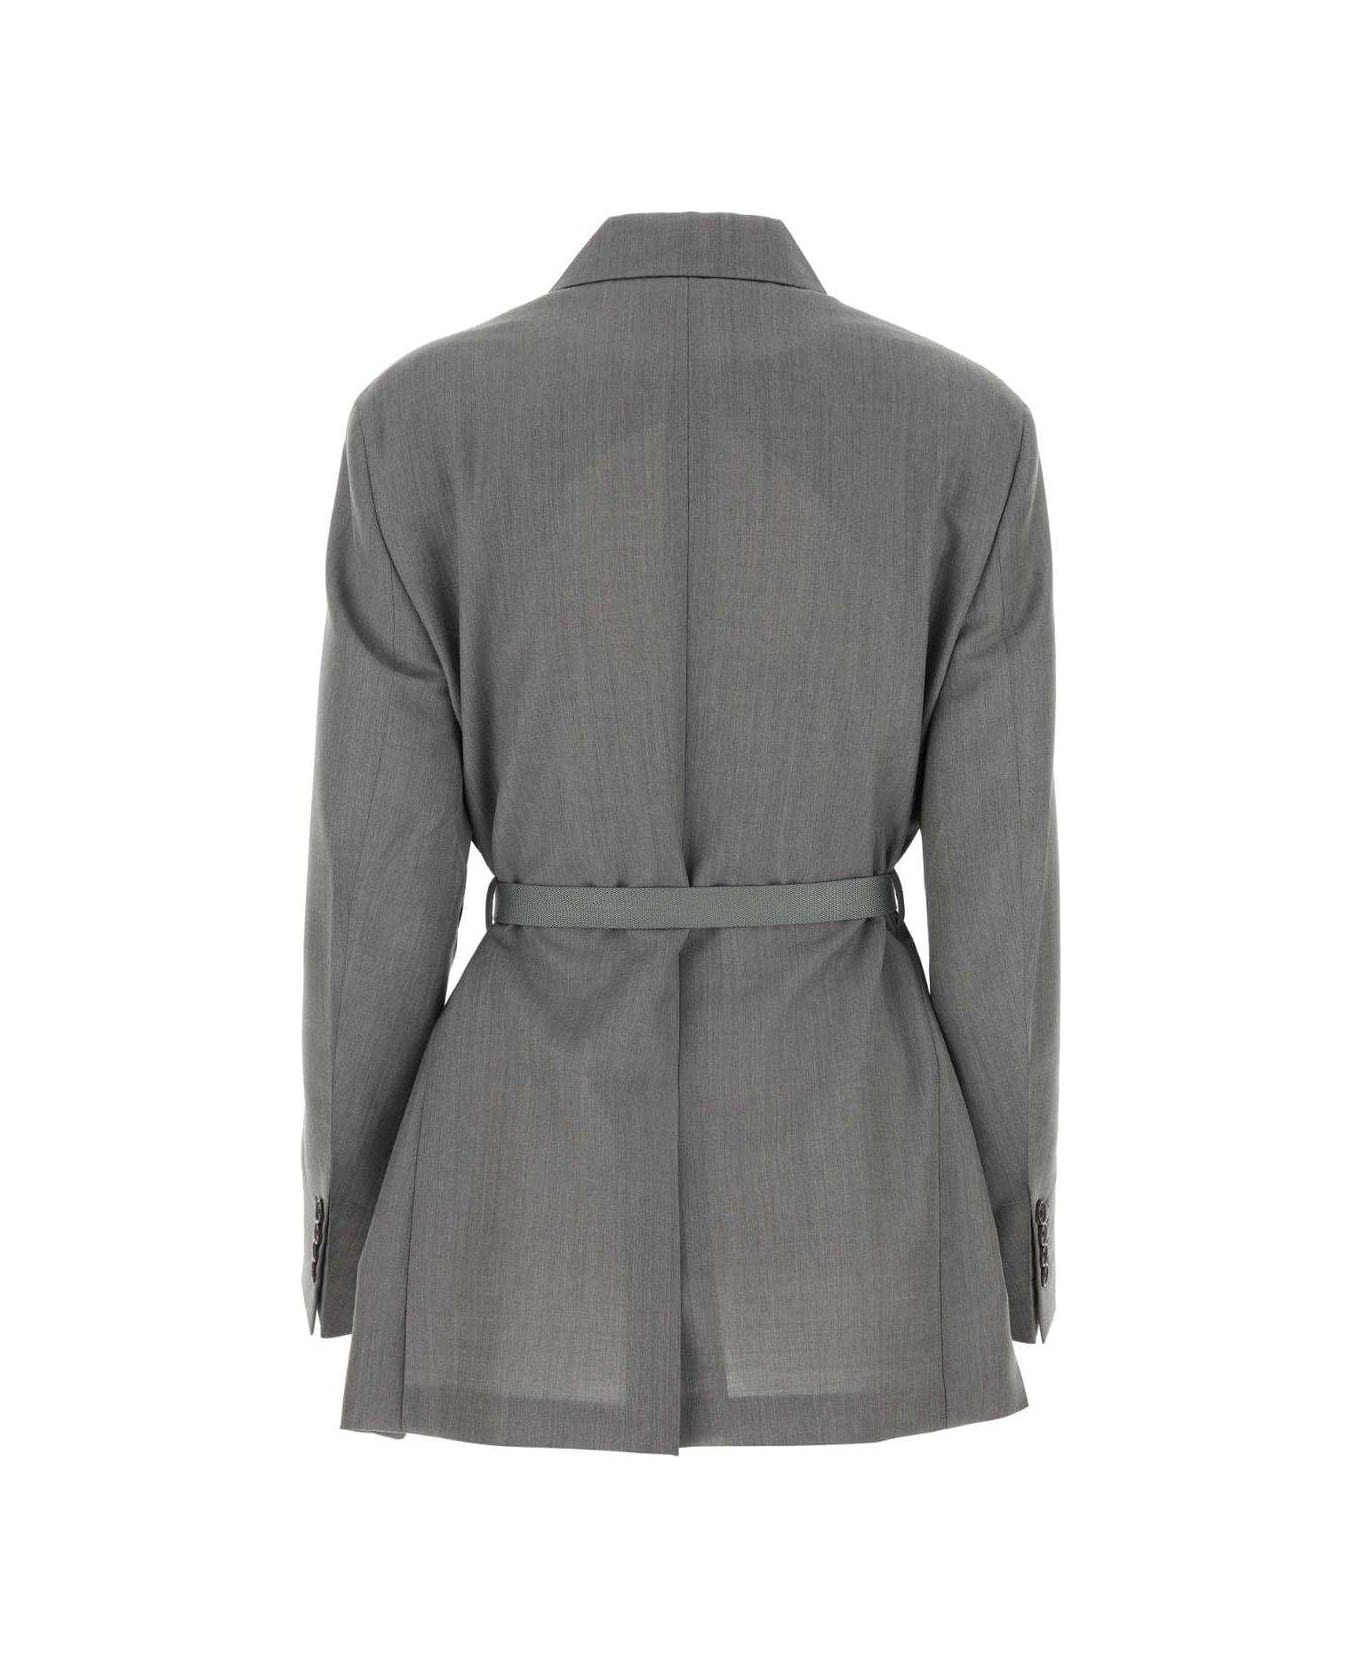 Prada Button-up Belted Jacket - GRANITO